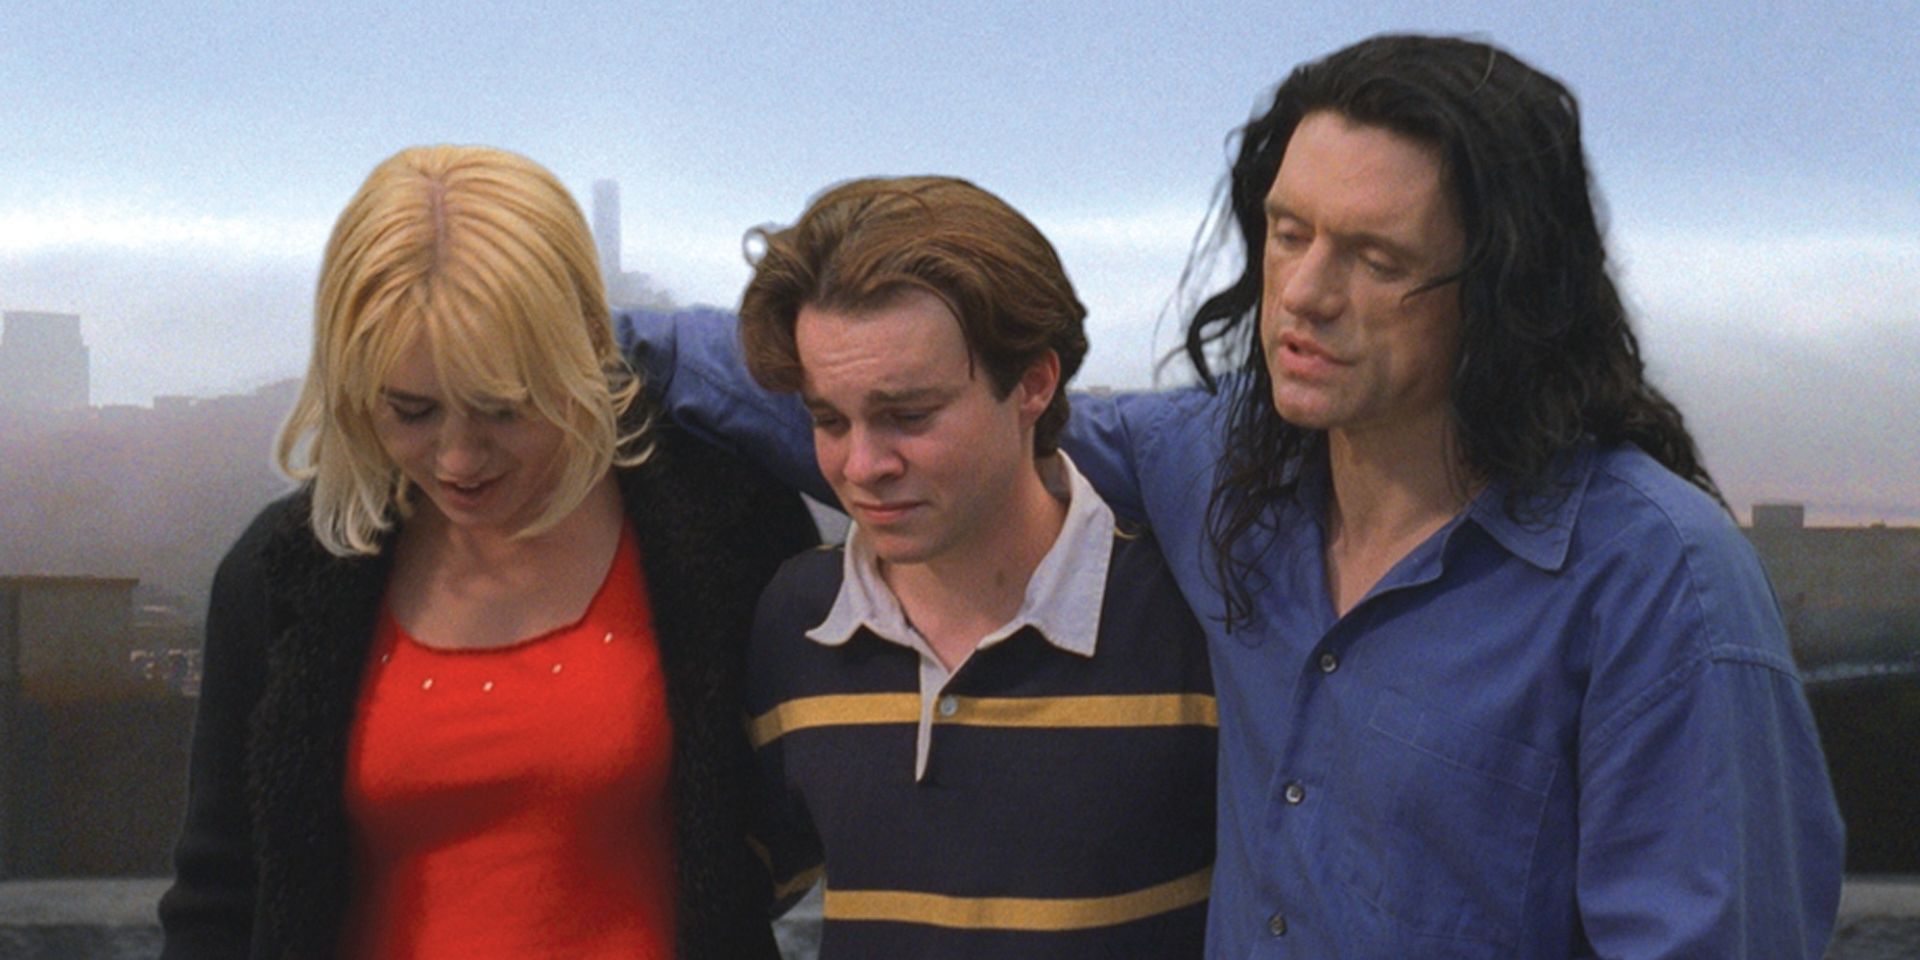 The Room, the movie that is so bad it's good